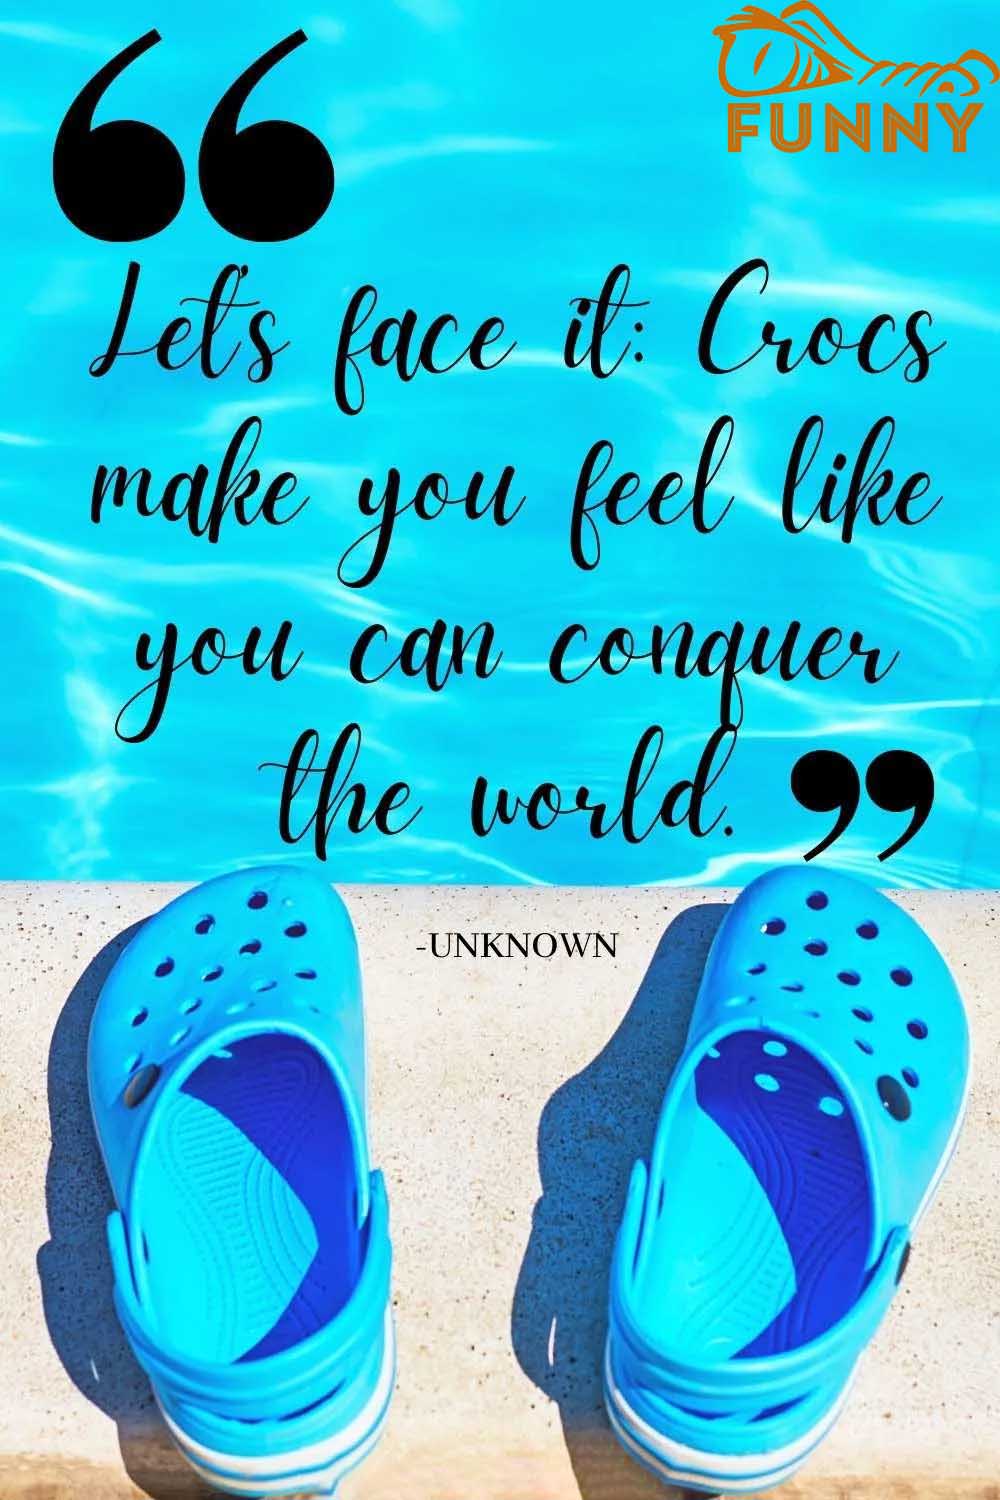 Lets face it Crocs make you feel like you can conquer the world